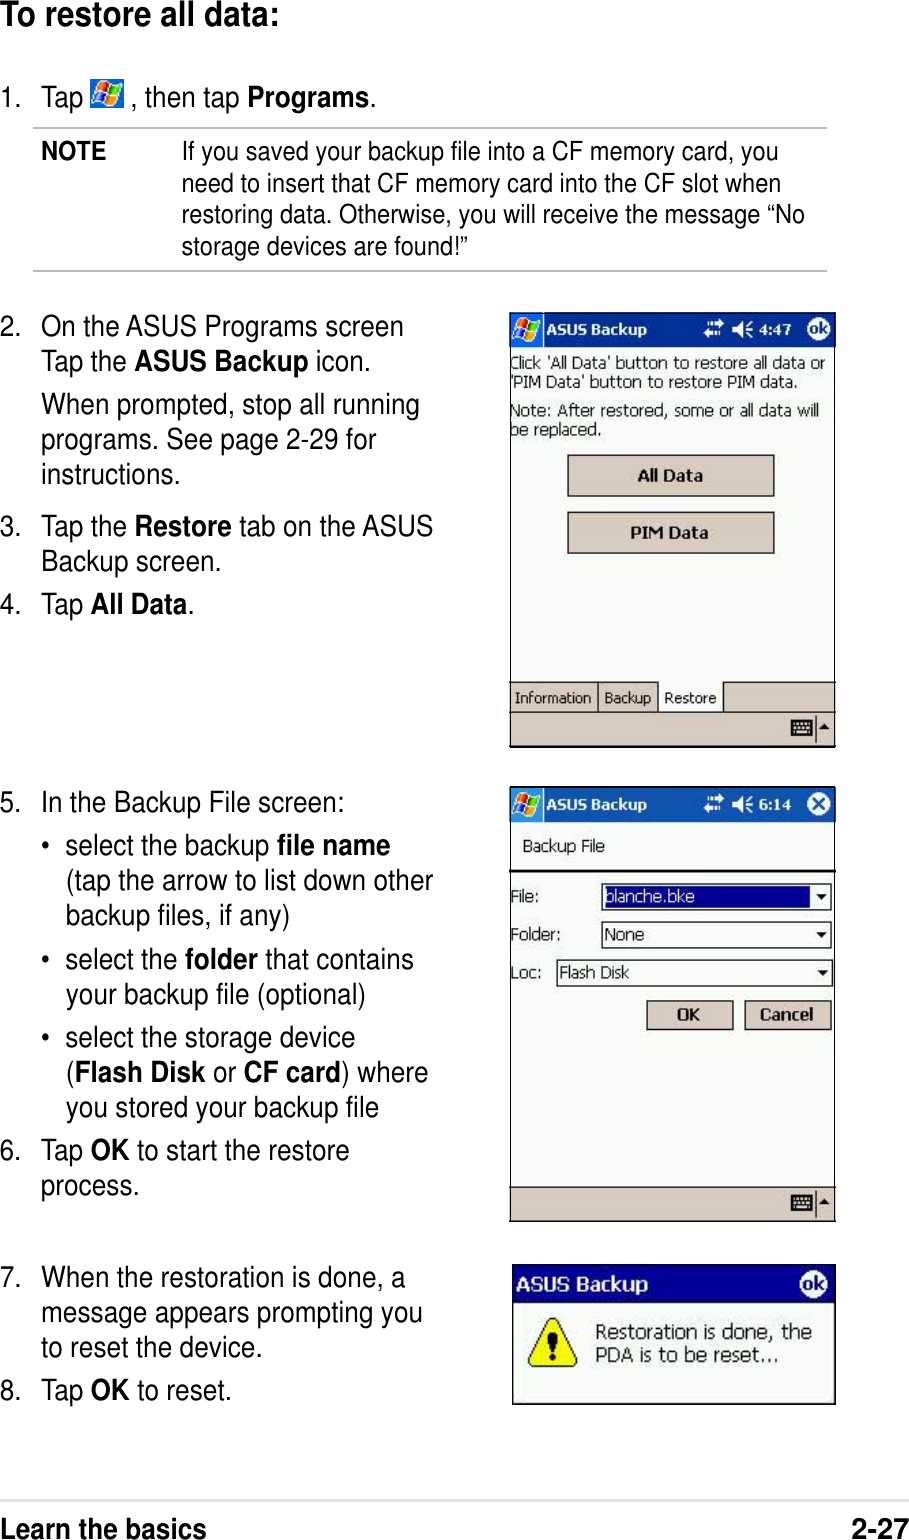 Learn the basics2-27To restore all data:1. Tap   , then tap Programs.NOTE If you saved your backup file into a CF memory card, youneed to insert that CF memory card into the CF slot whenrestoring data. Otherwise, you will receive the message “Nostorage devices are found!”2. On the ASUS Programs screenTap the ASUS Backup icon.When prompted, stop all runningprograms. See page 2-29 forinstructions.3. Tap the Restore tab on the ASUSBackup screen.4. Tap All Data.5. In the Backup File screen:•select the backup file name(tap the arrow to list down otherbackup files, if any)•select the folder that containsyour backup file (optional)•select the storage device(Flash Disk or CF card) whereyou stored your backup file6. Tap OK to start the restoreprocess.7. When the restoration is done, amessage appears prompting youto reset the device.8. Tap OK to reset.